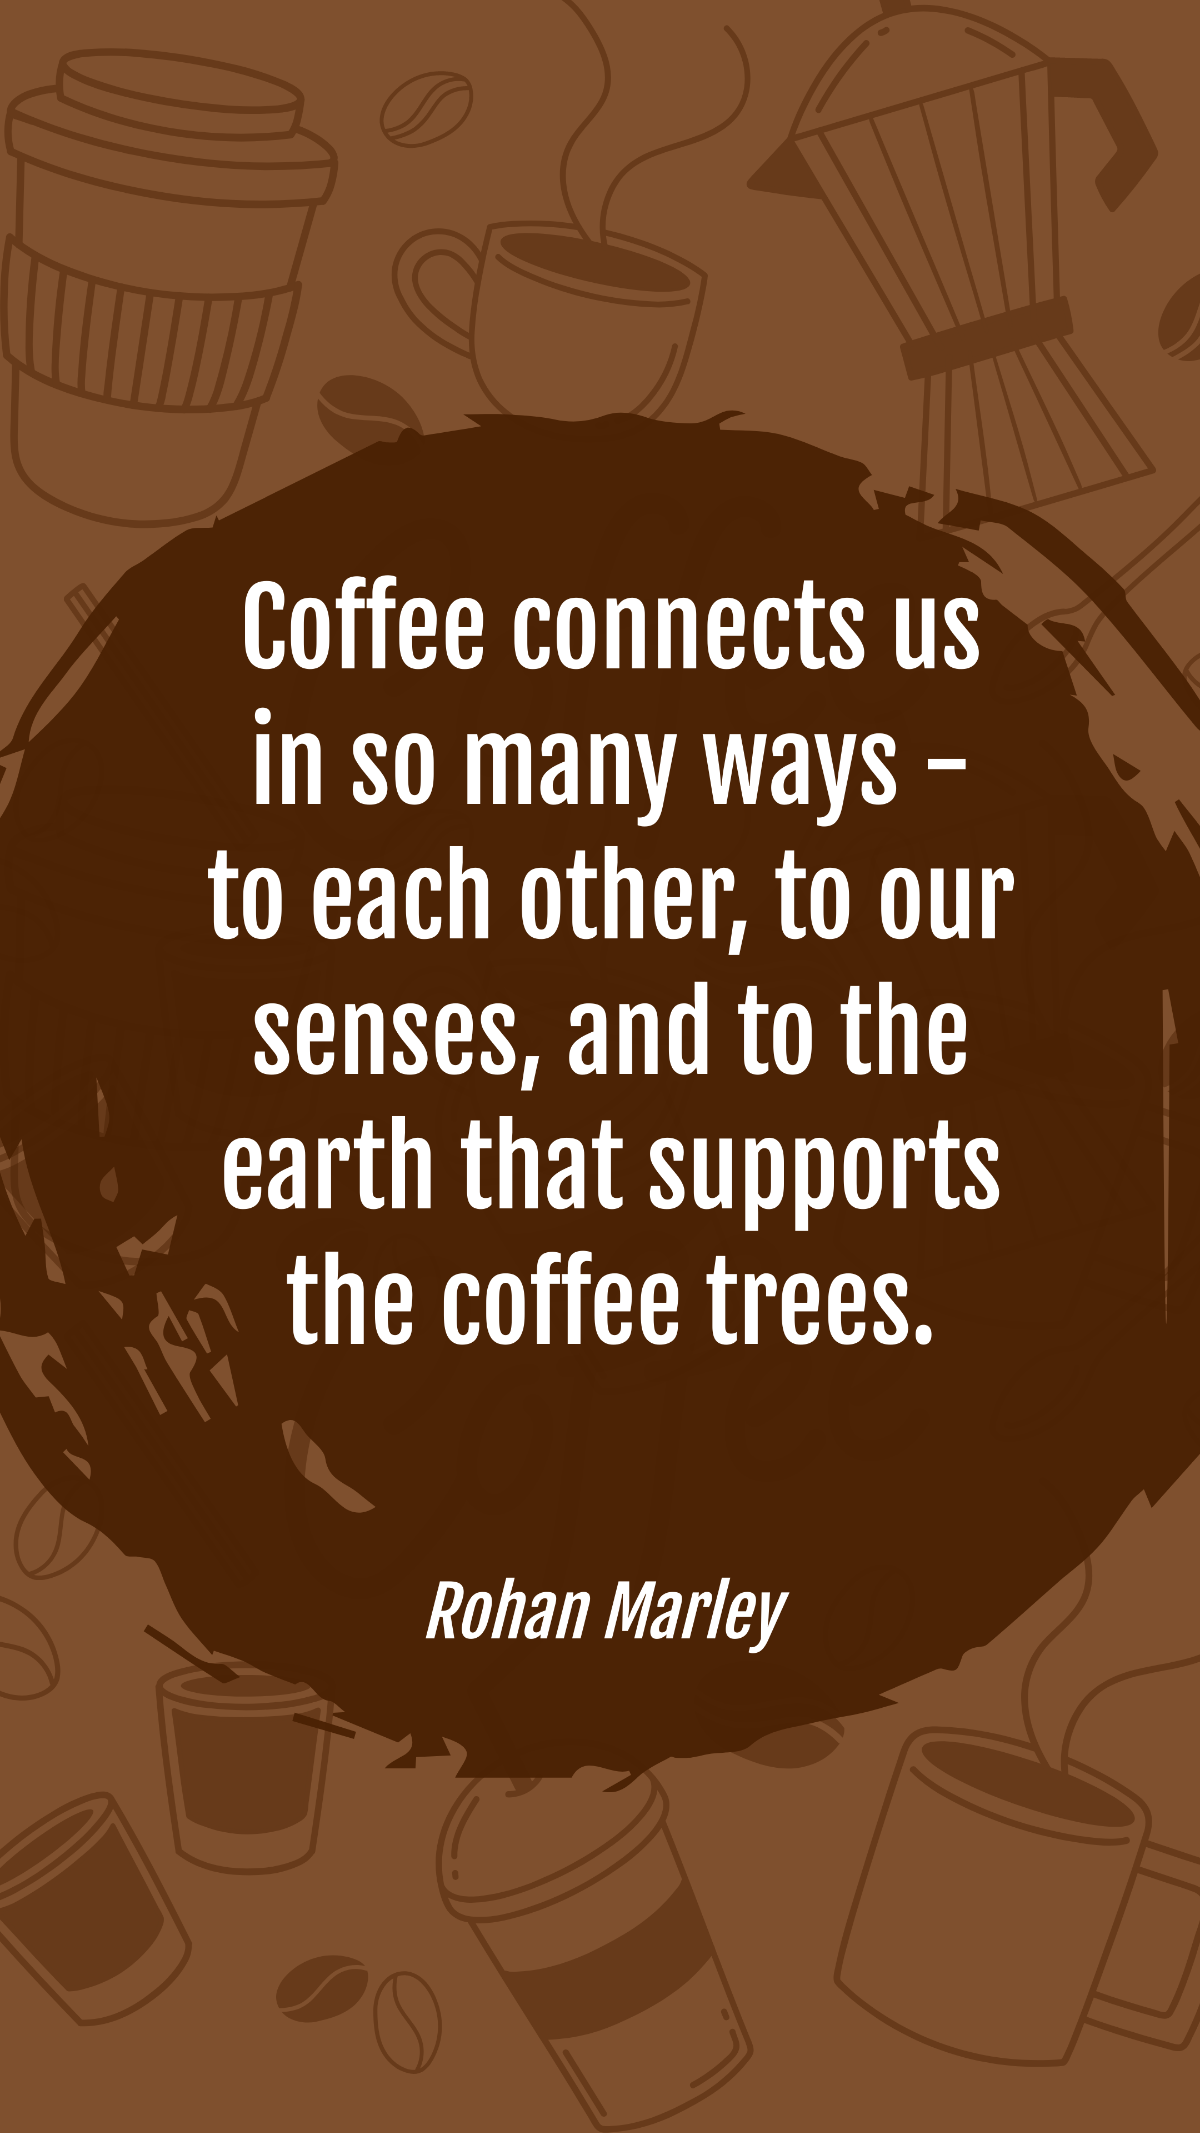 Free Rohan Marley - Coffee connects us in so many ways - to each other, to our senses, and to the earth that supports the coffee trees. Template